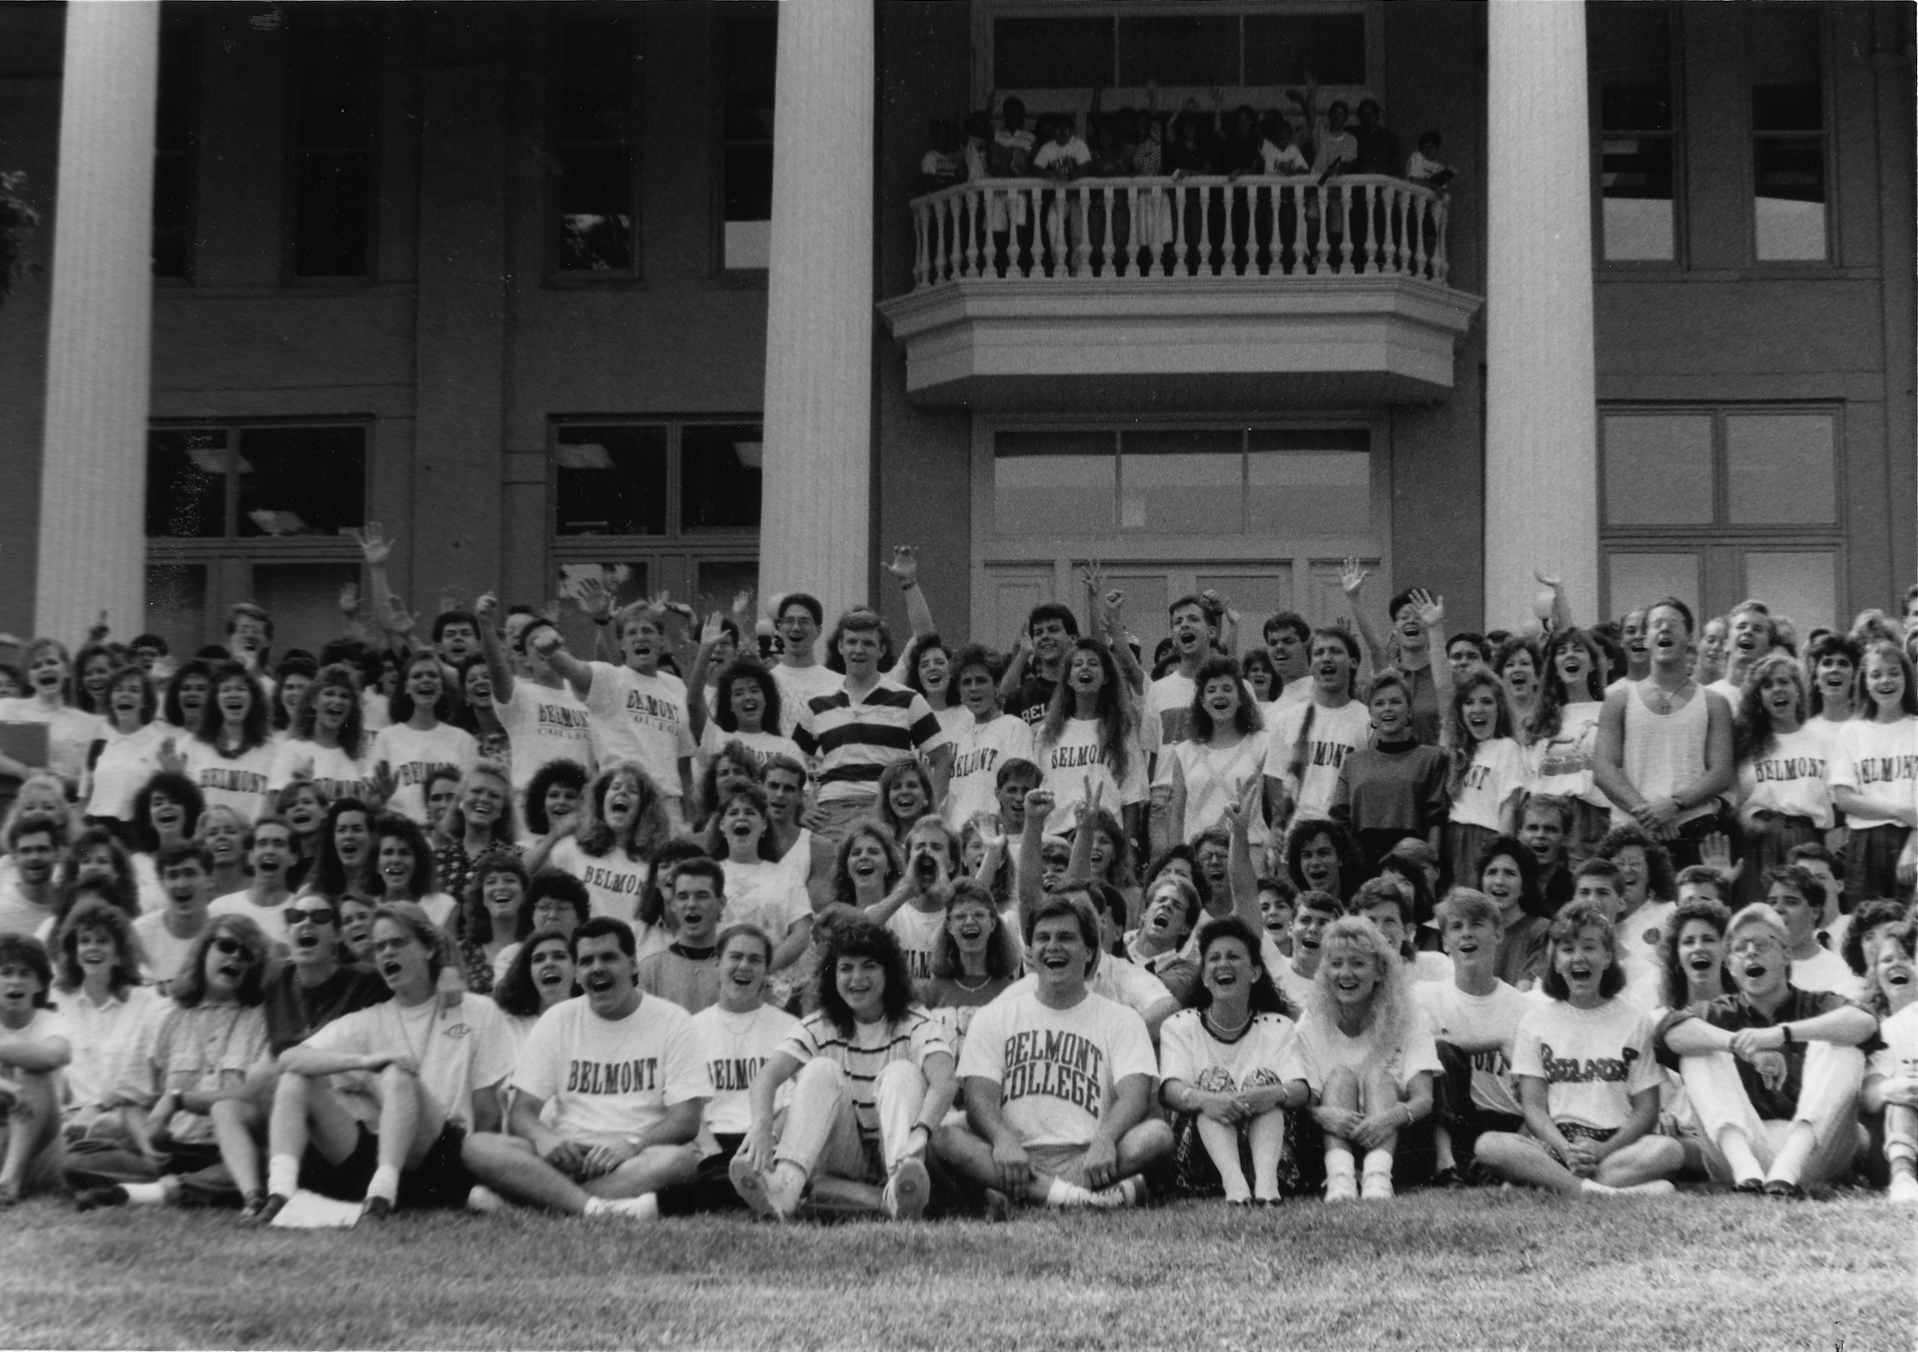 A black and white photo of Belmont College students